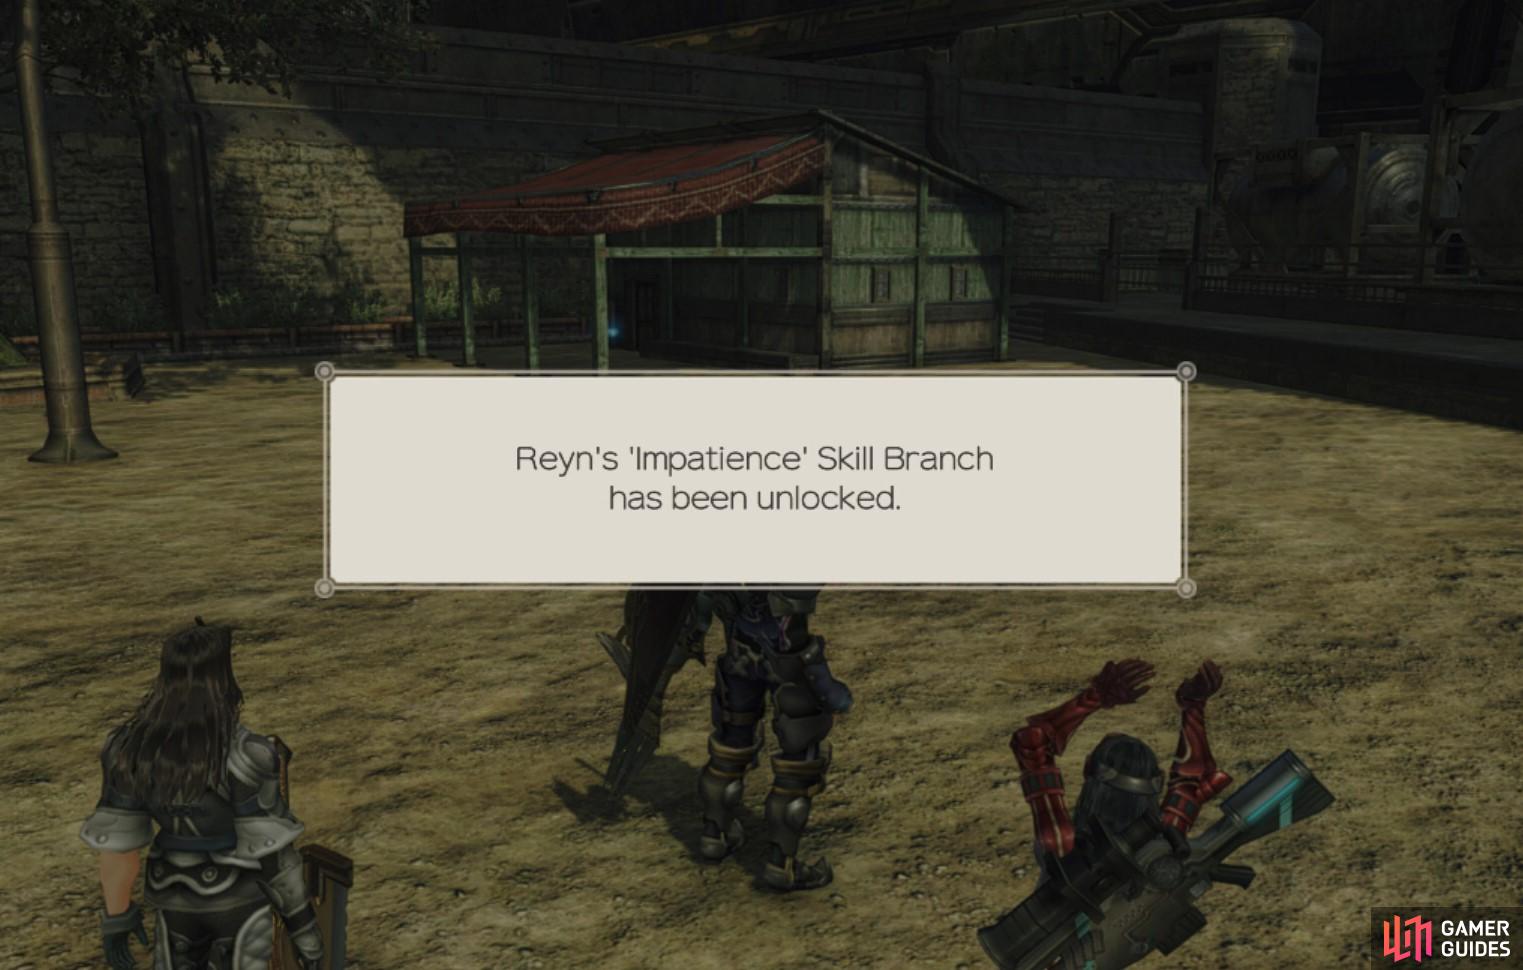 Competing this quest will unlock Reyn’s skill branch, Impatience. 